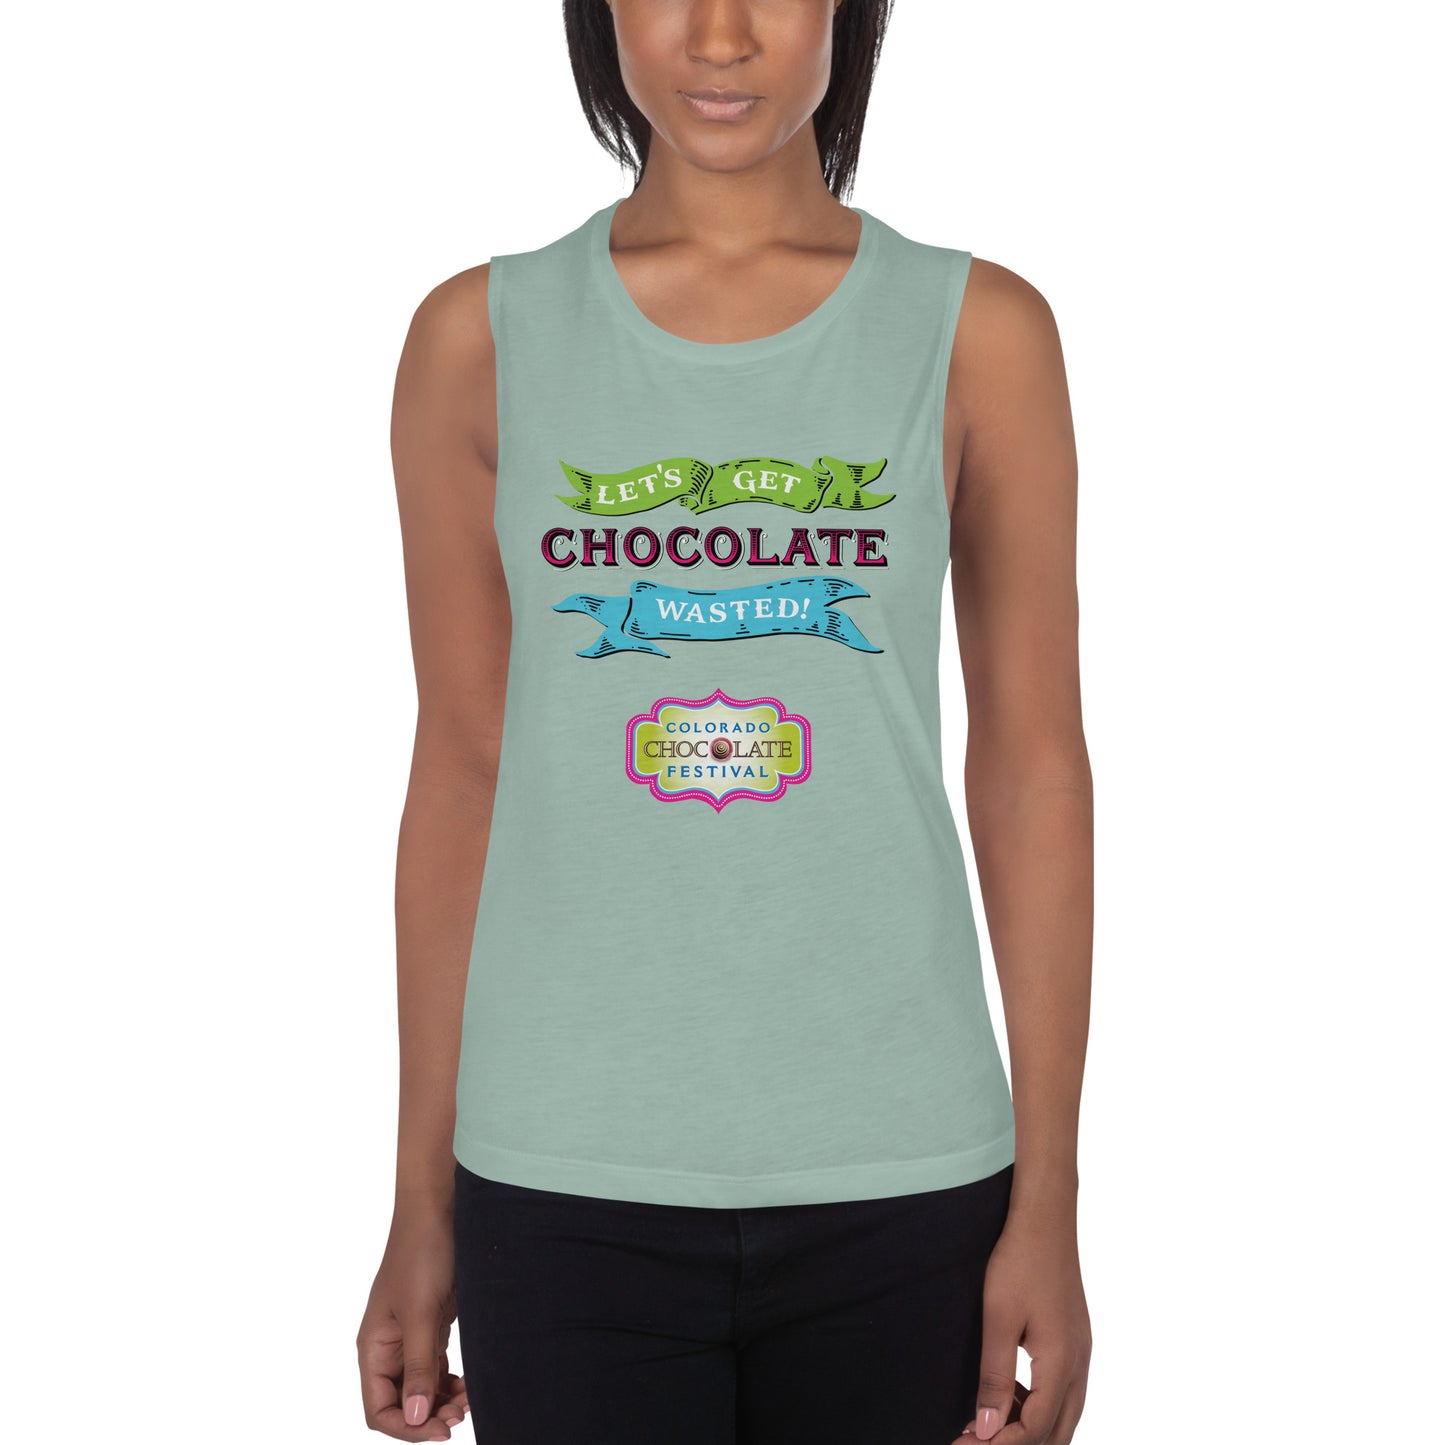 Chocolate Wasted Ladies’ Muscle Tank